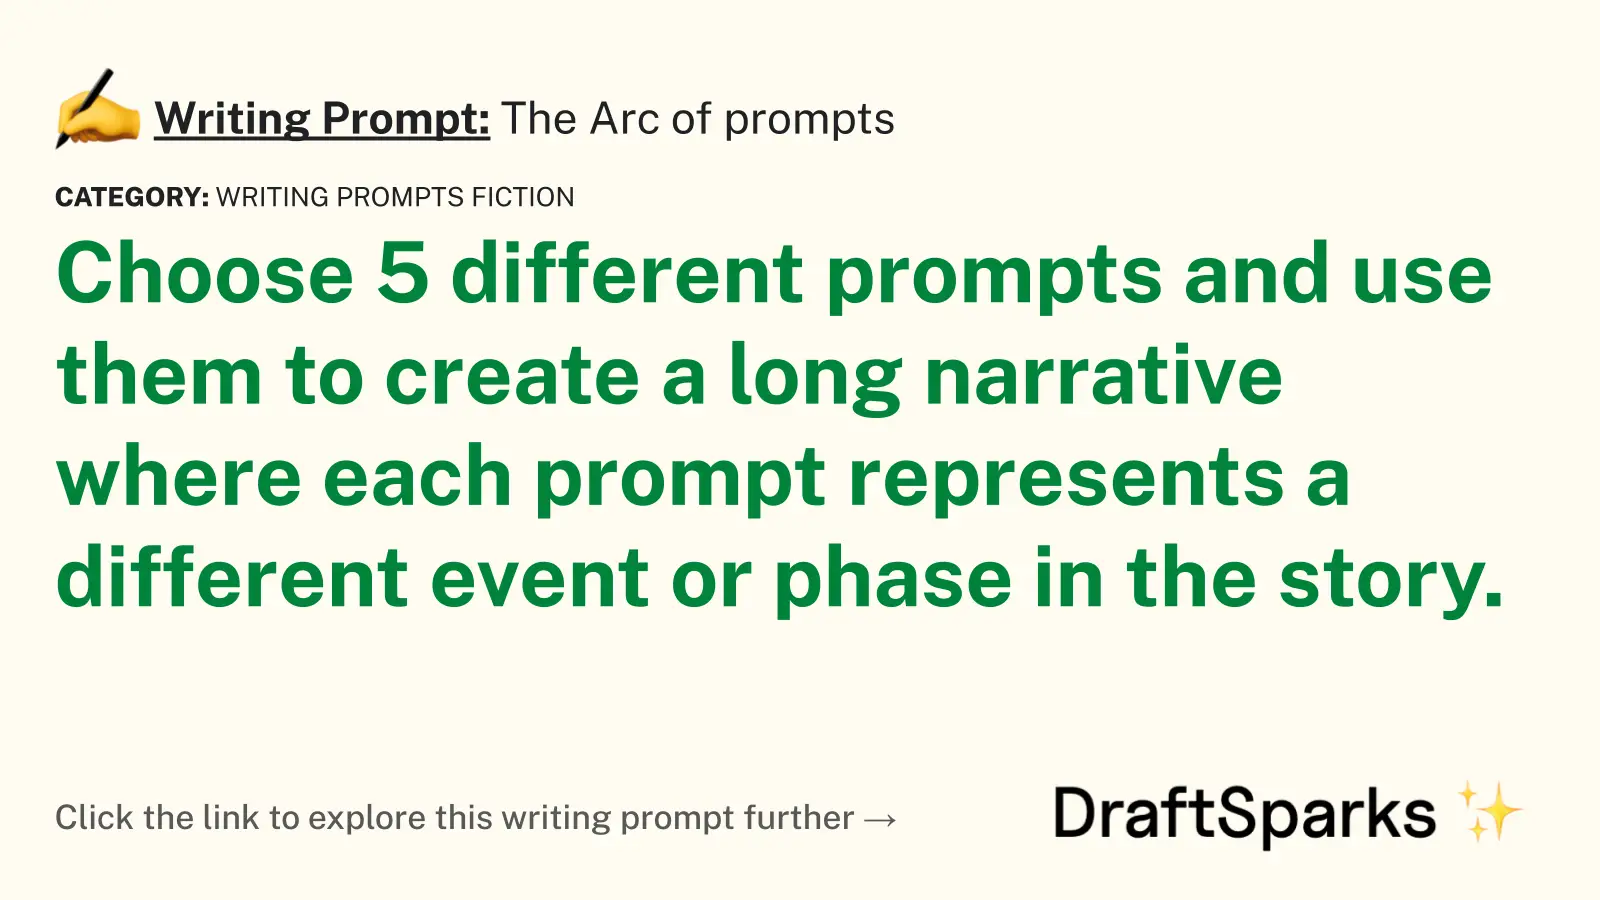 The Arc of prompts